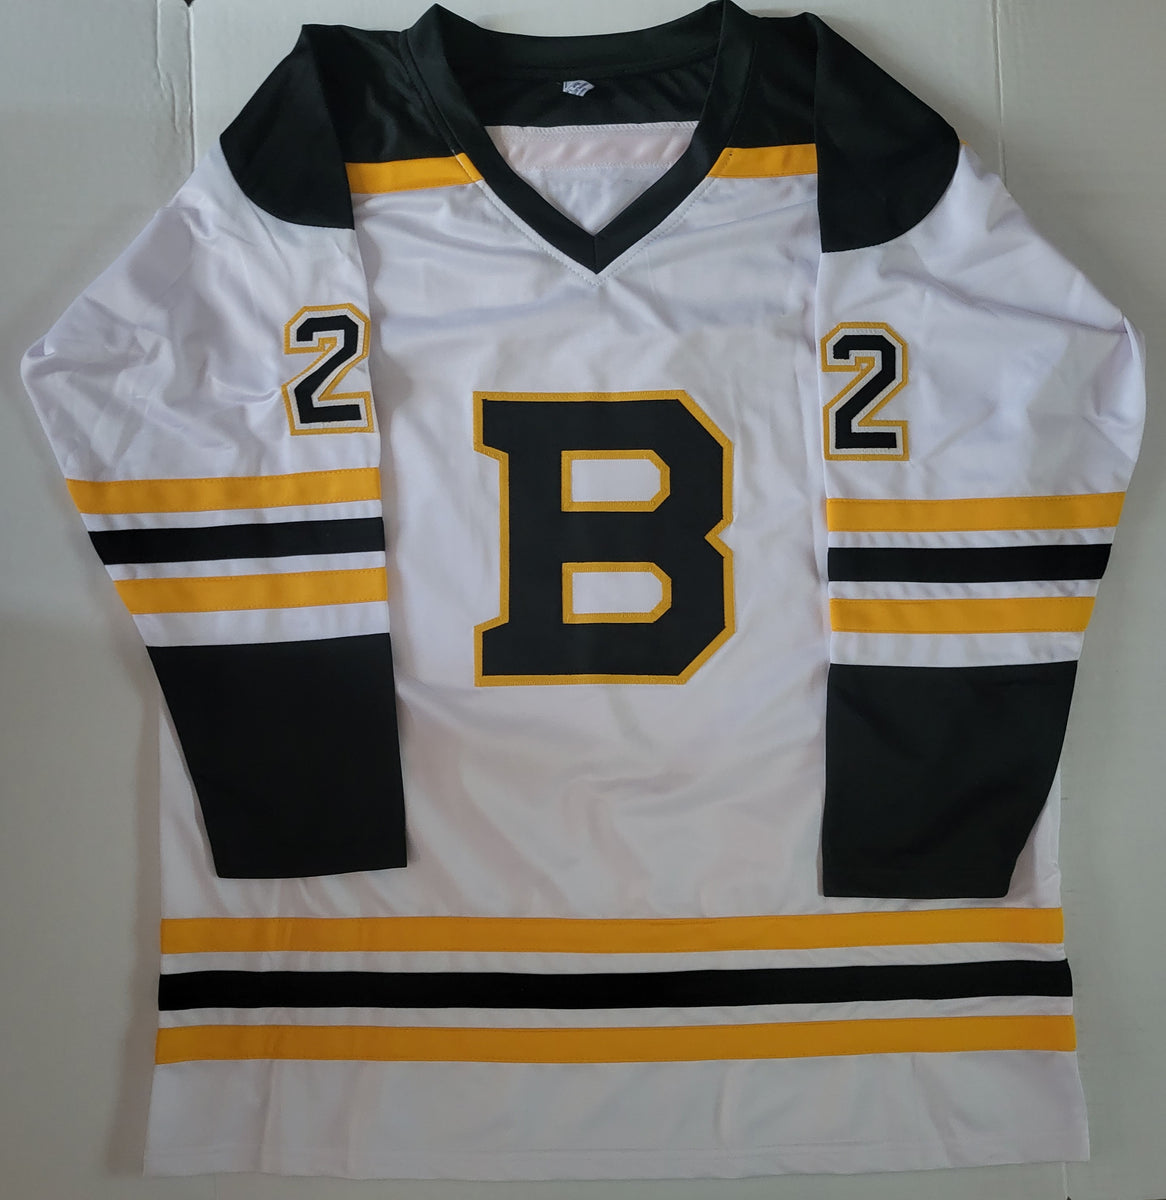 Shawn Thornton Boston Bruins Autographed Custom Hockey Jersey with JSA –  Manchester sports card store